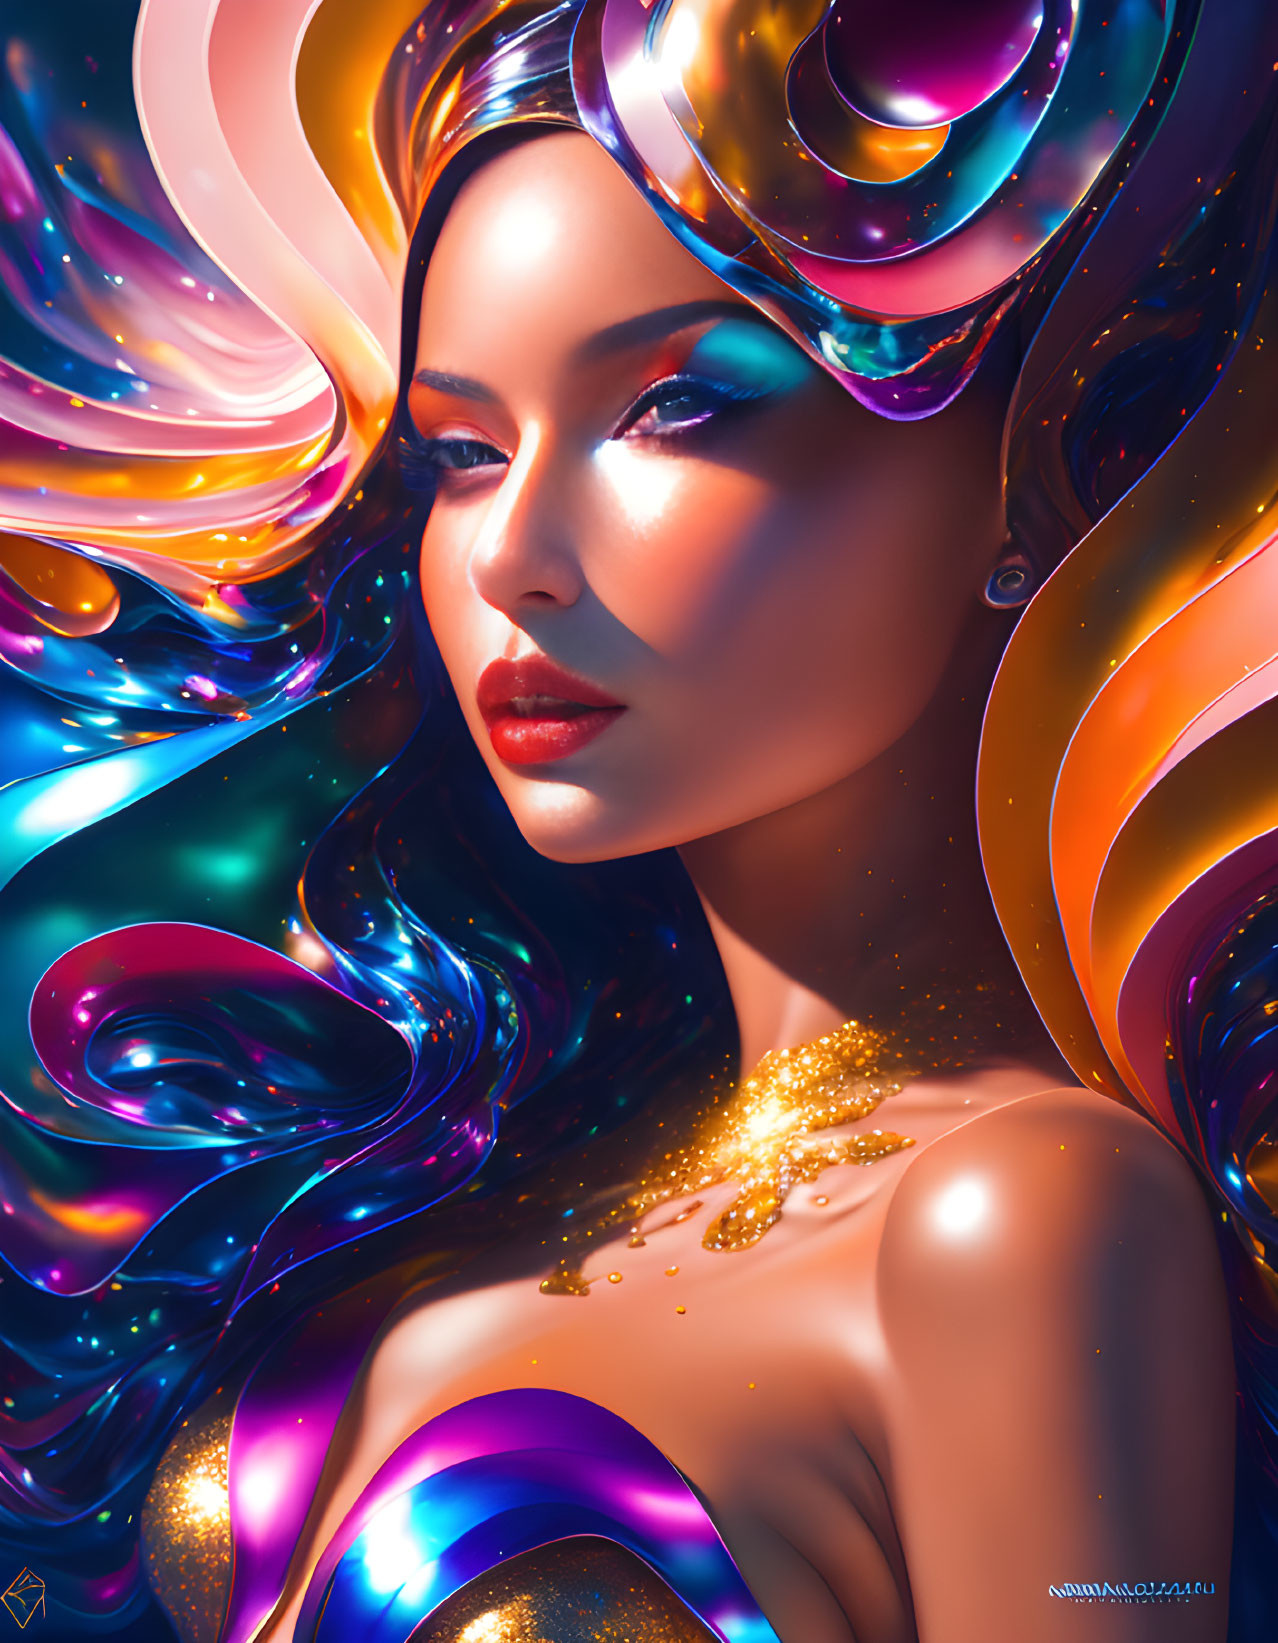 Colorful digital portrait of woman with swirling hair-like forms and golden sparkles.